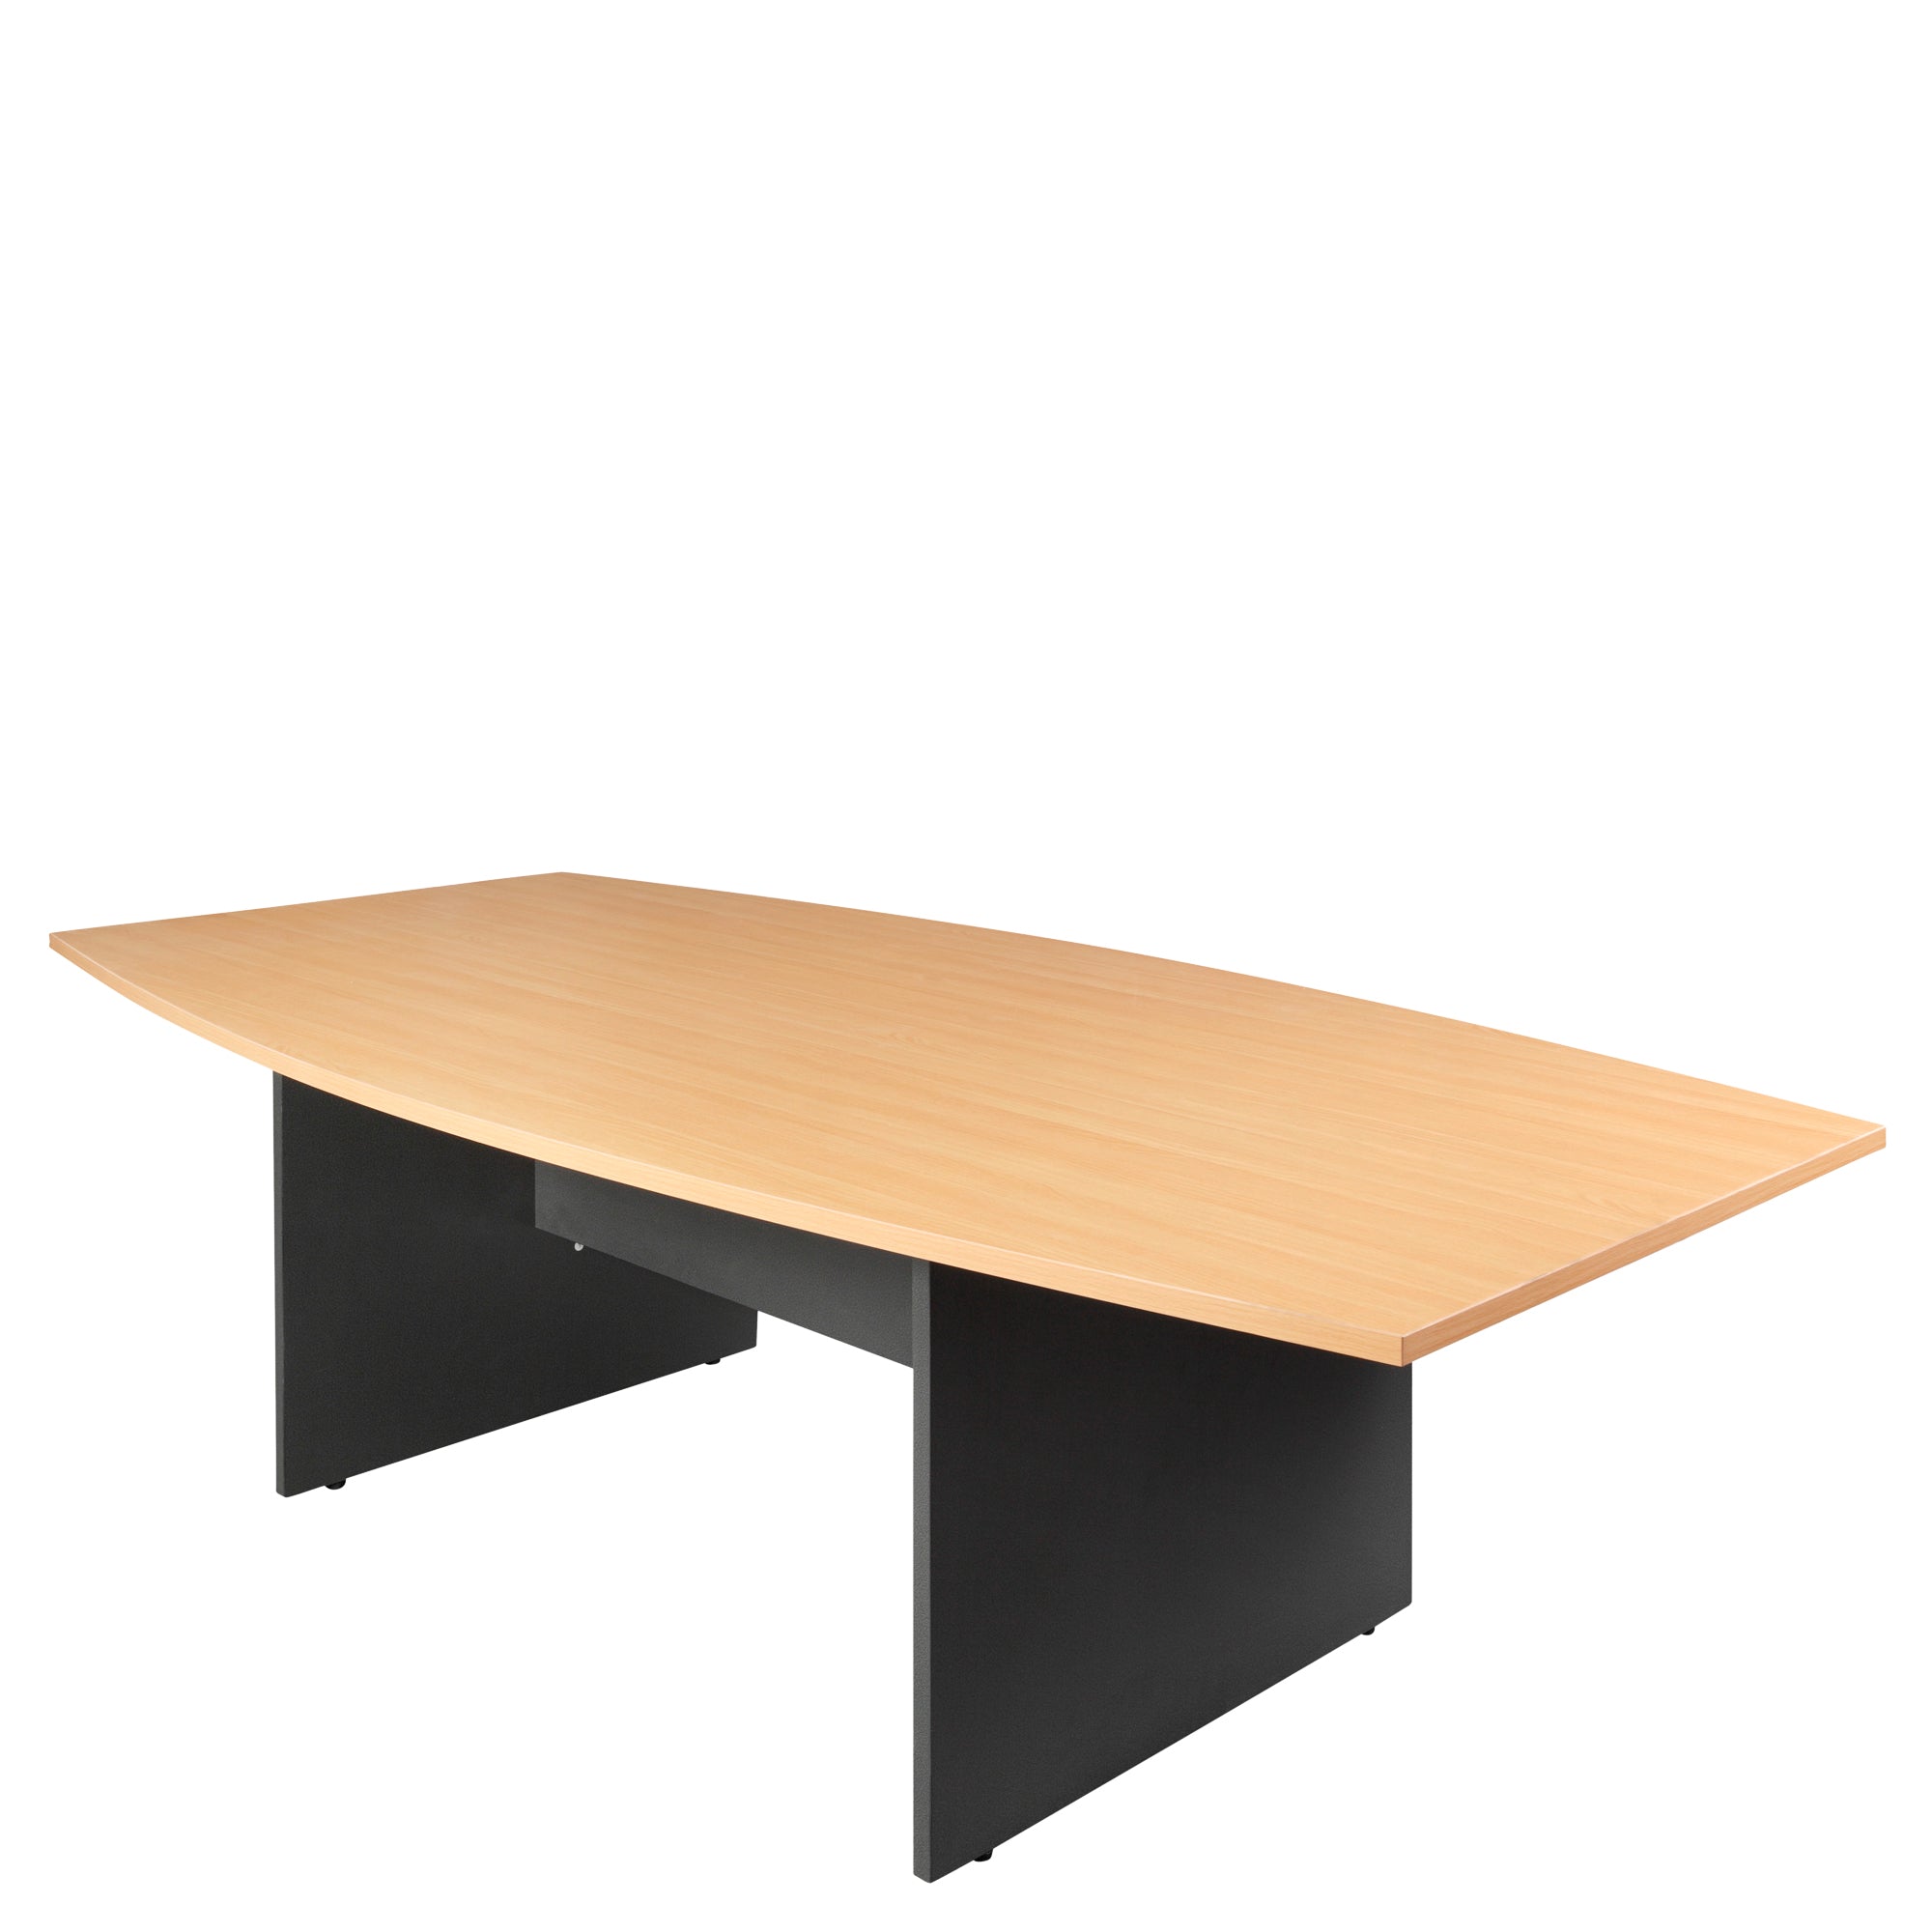 Logan Boat Conference Table